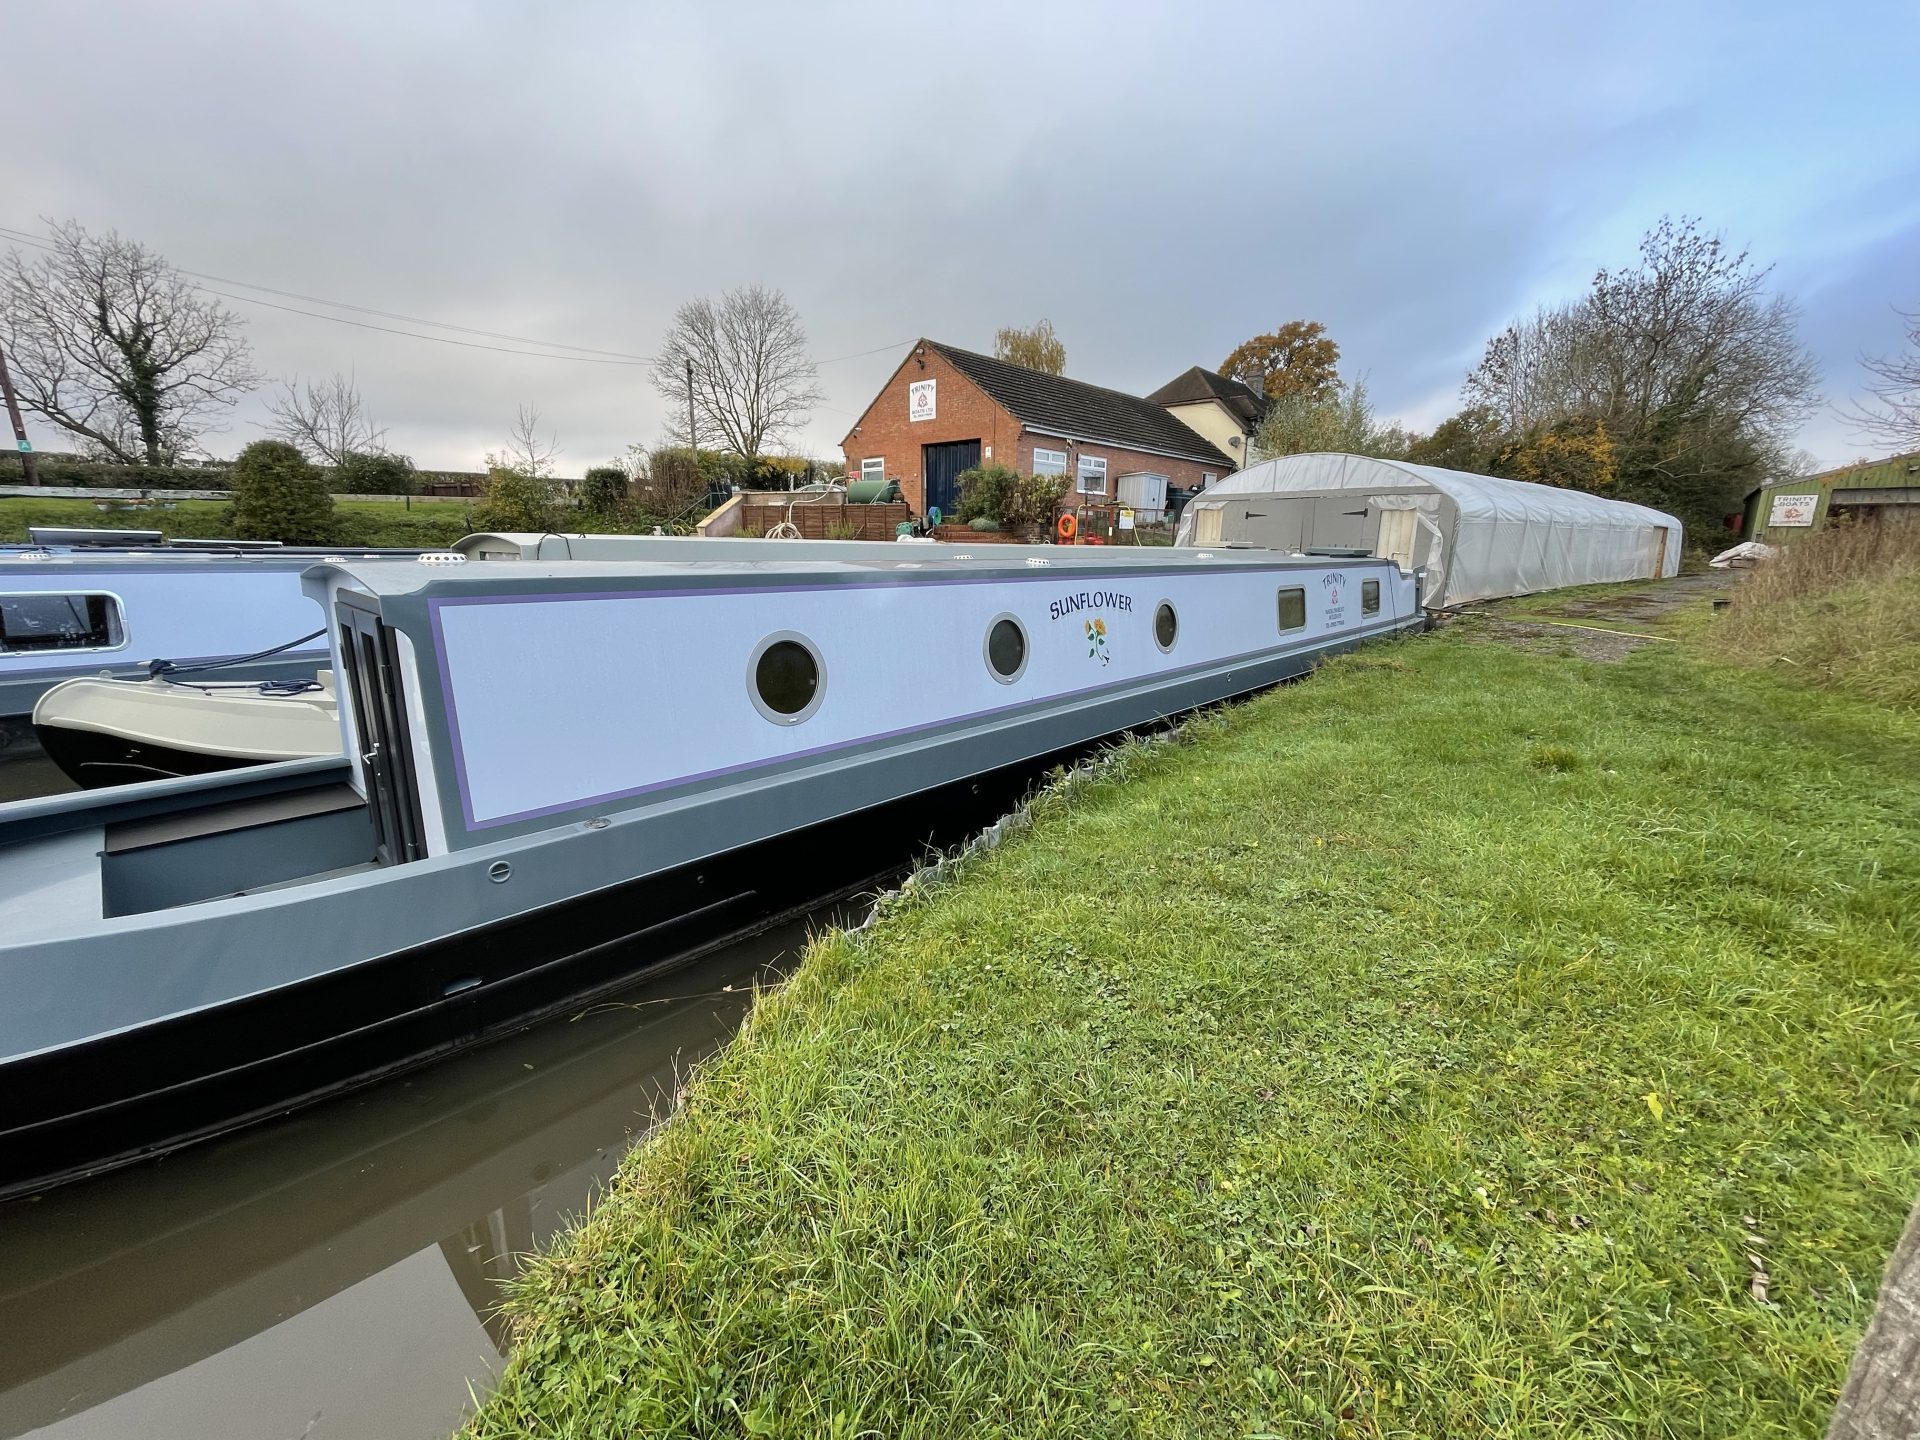 The TR-Sunflower class canal boat